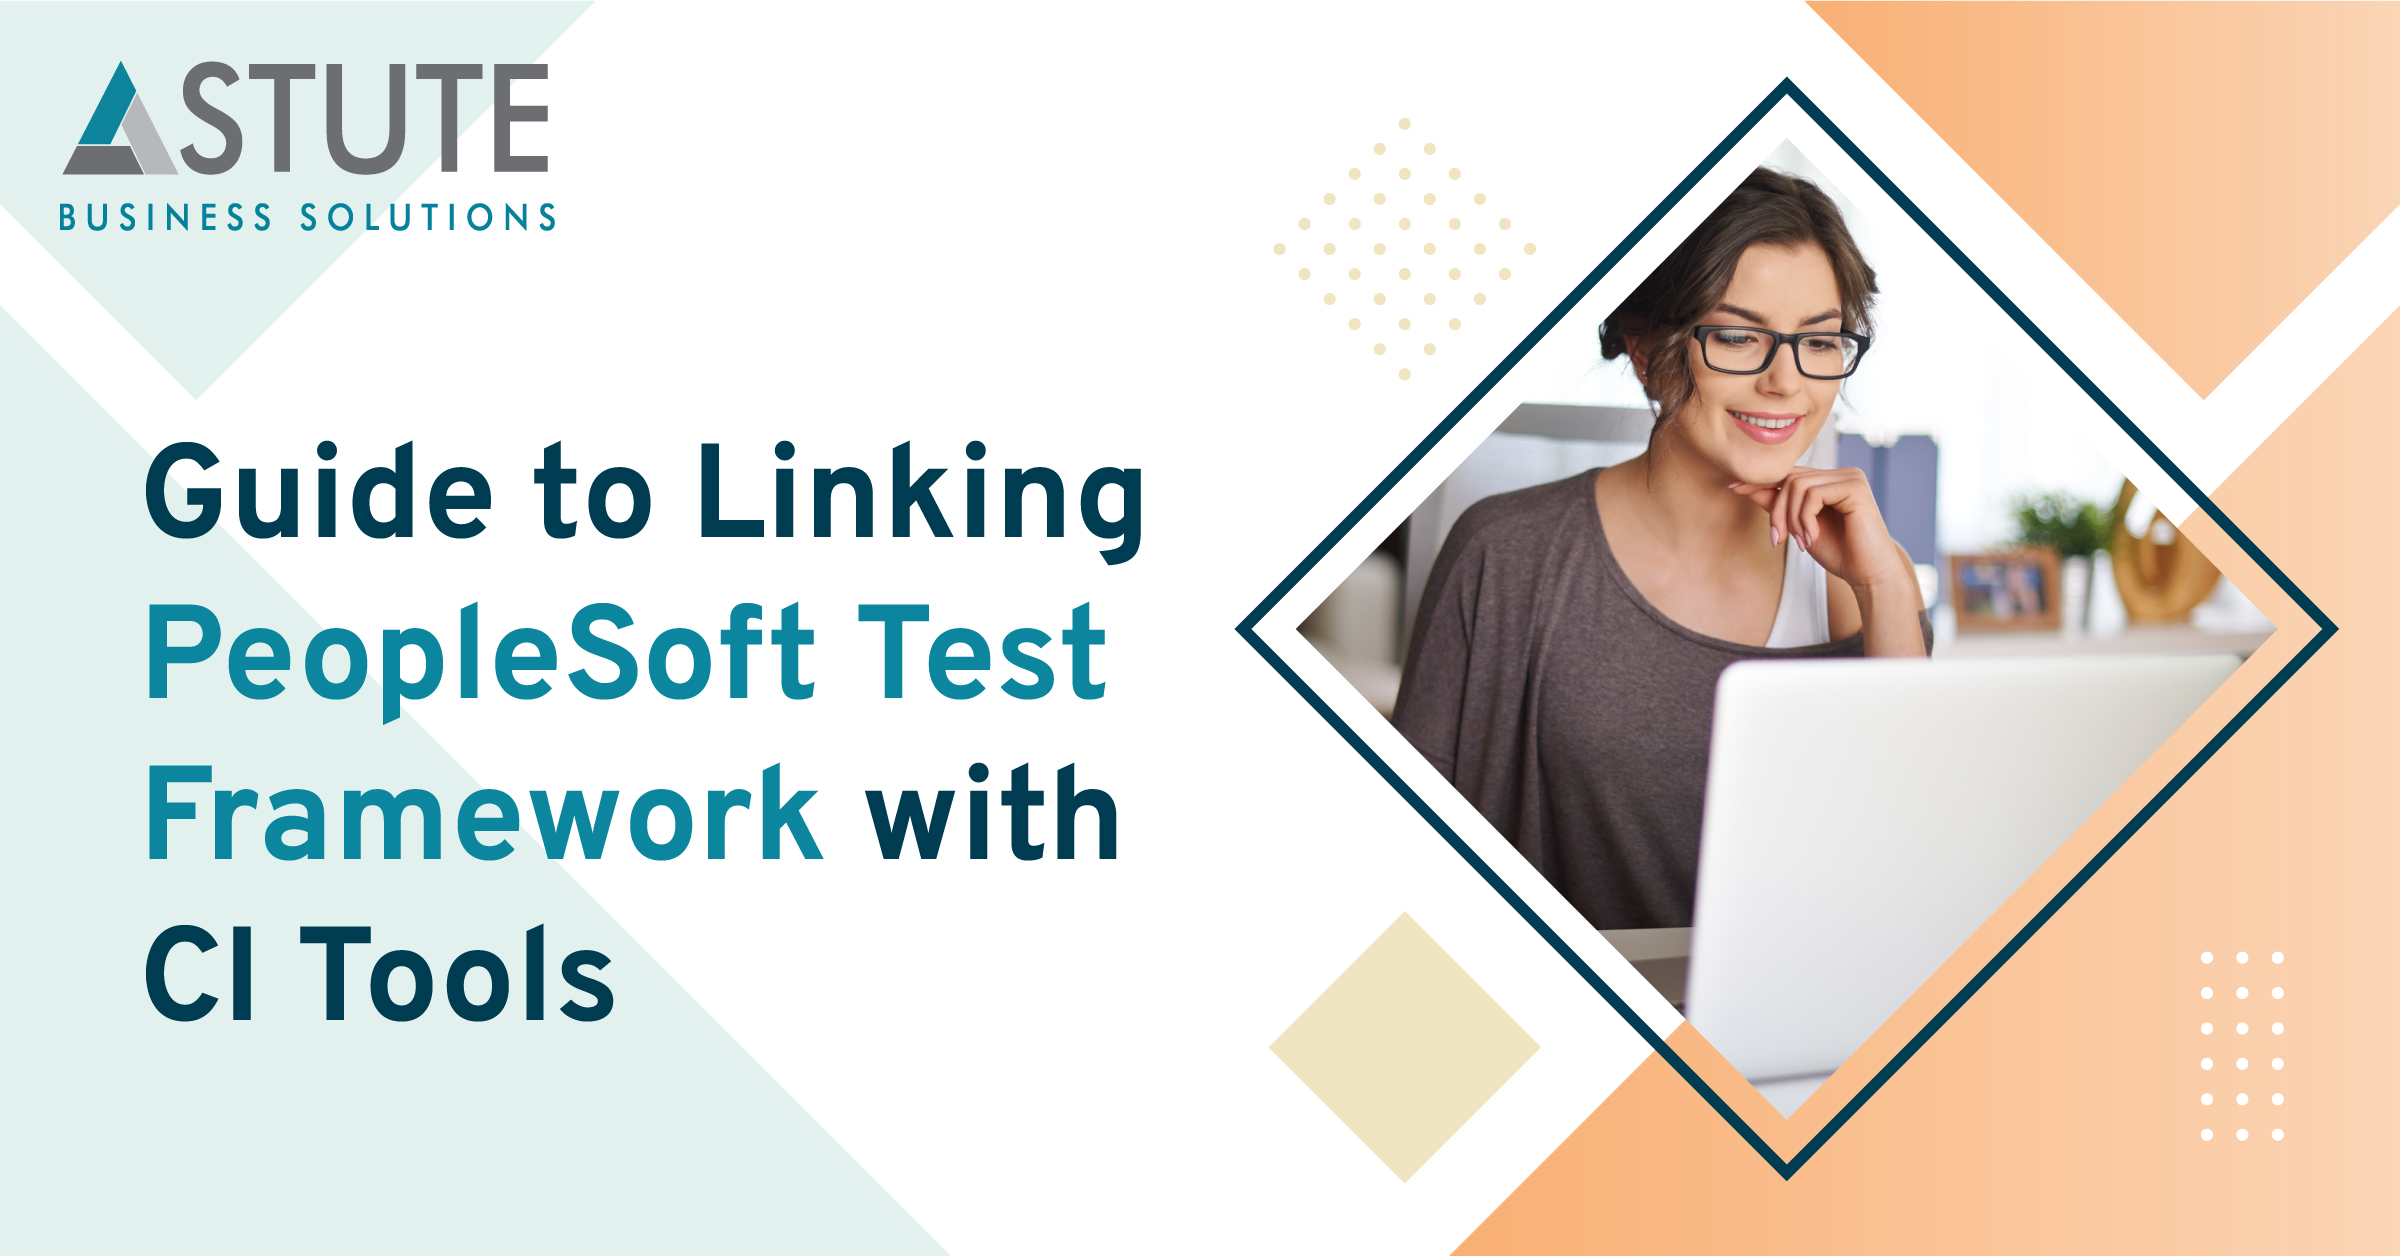 Guide to Linking PeopleSoft Test Framework with CI Tools